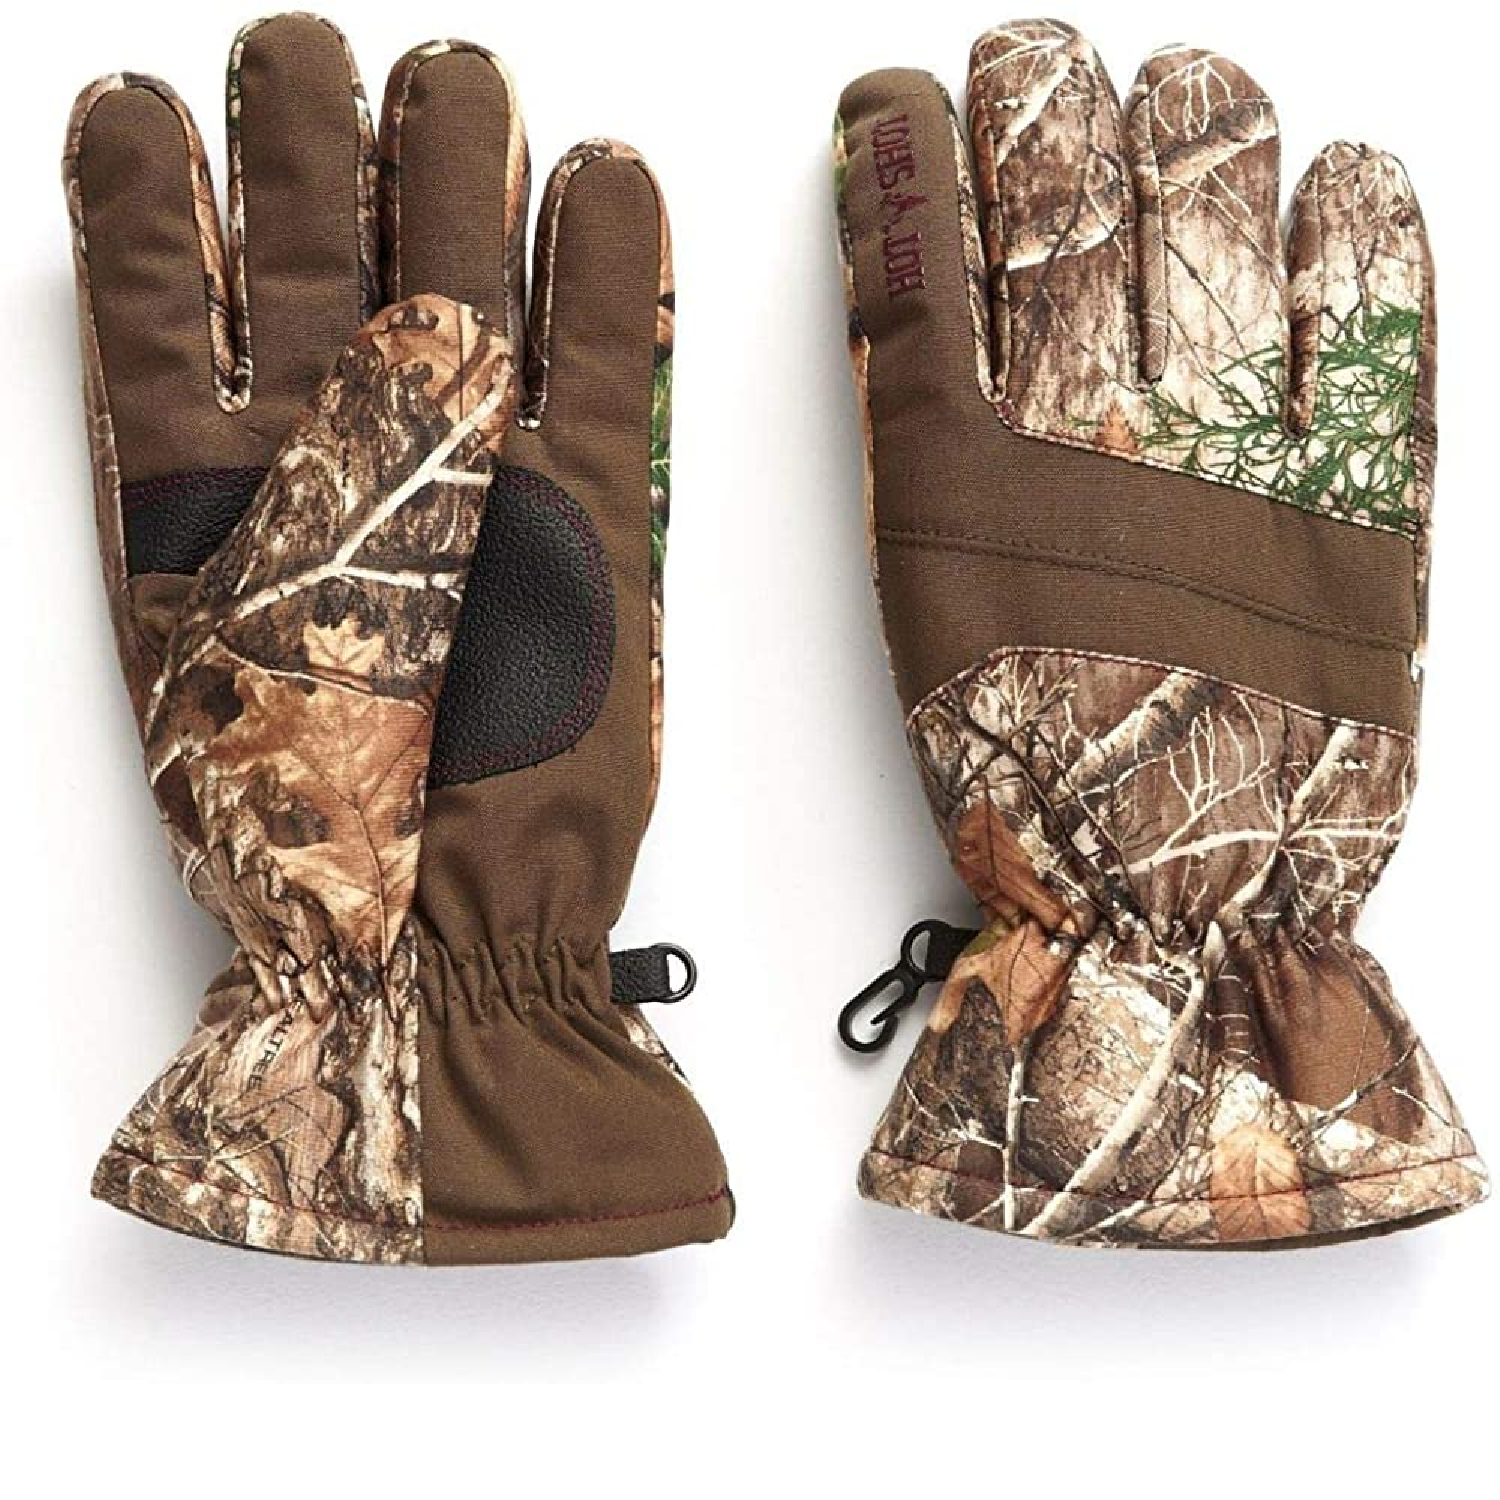 HOT SHOT Women's Camo Defender Glove Realtree Edge Outdoor Hunting Camouflage